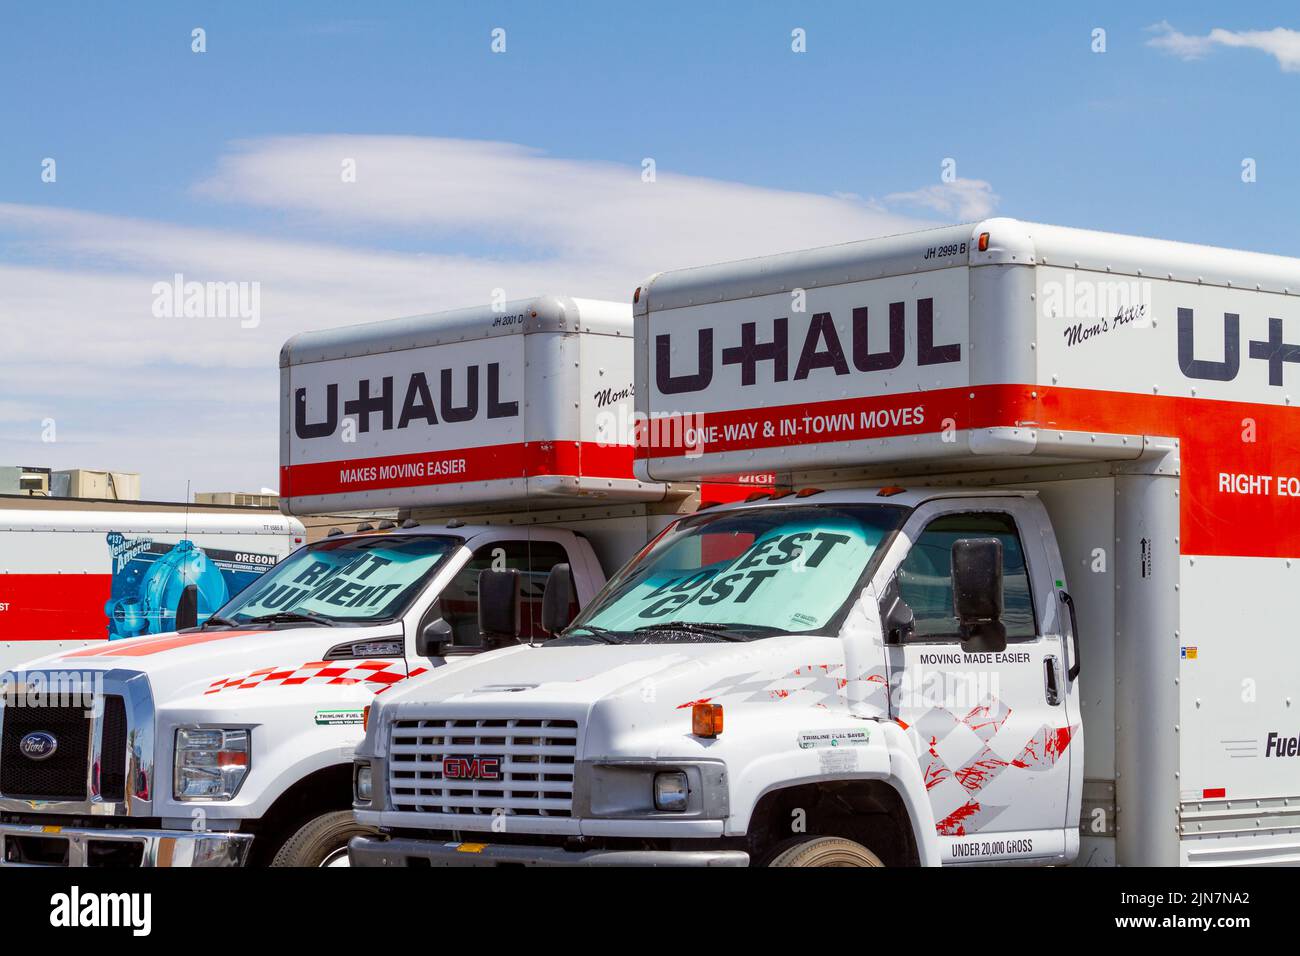 Victorville, CA, USA – August 8, 2022: A fleet of red and white rental U-Haul cargo vans parked in Victorville, California. Stock Photo